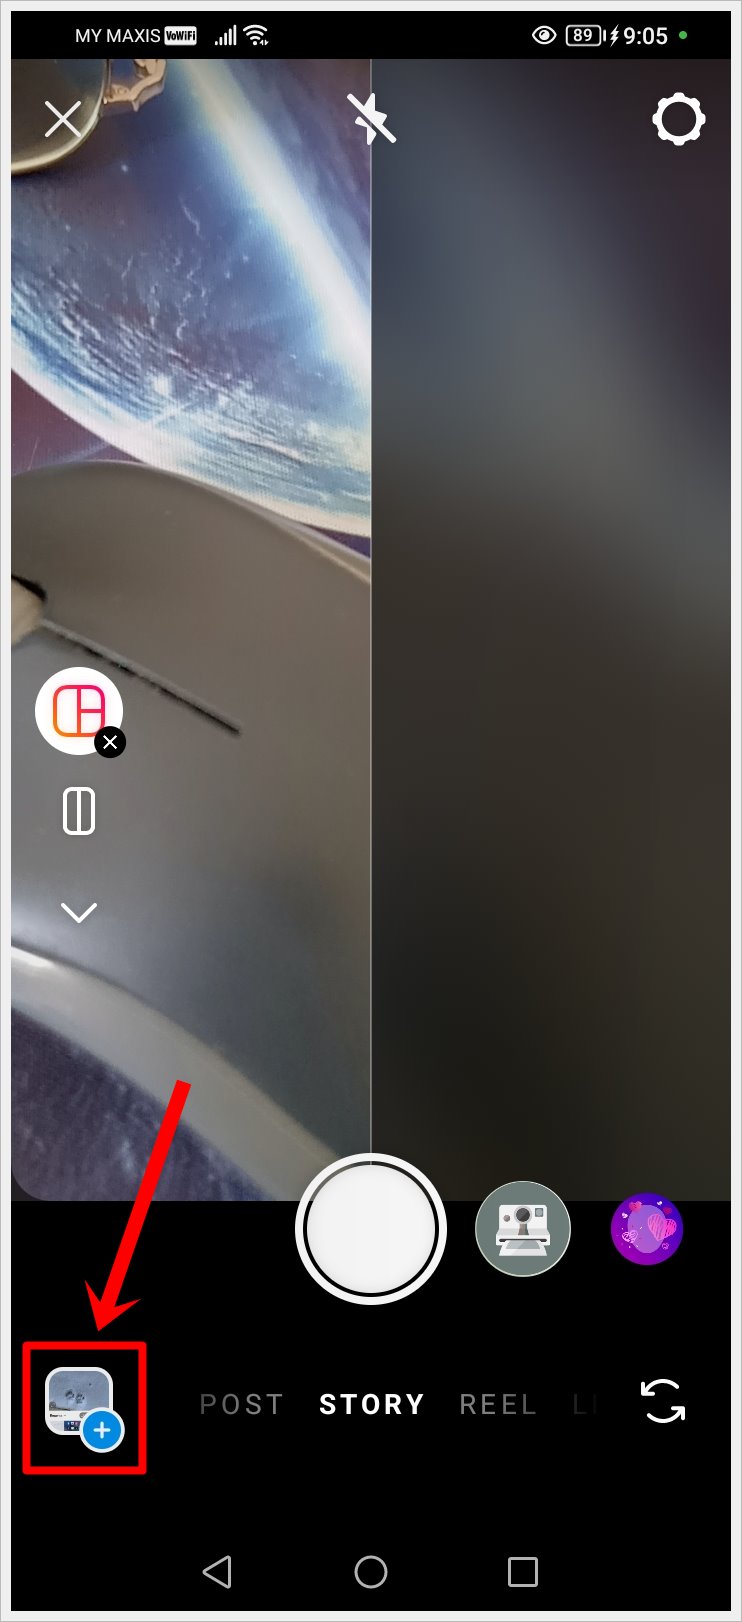 This image shows a screenshot of an Instagram's viewfinder page on an Android phone. The 2 side-by-side photos layout has been set and the 'Gallery' icon in the bottom-left is highlighted.